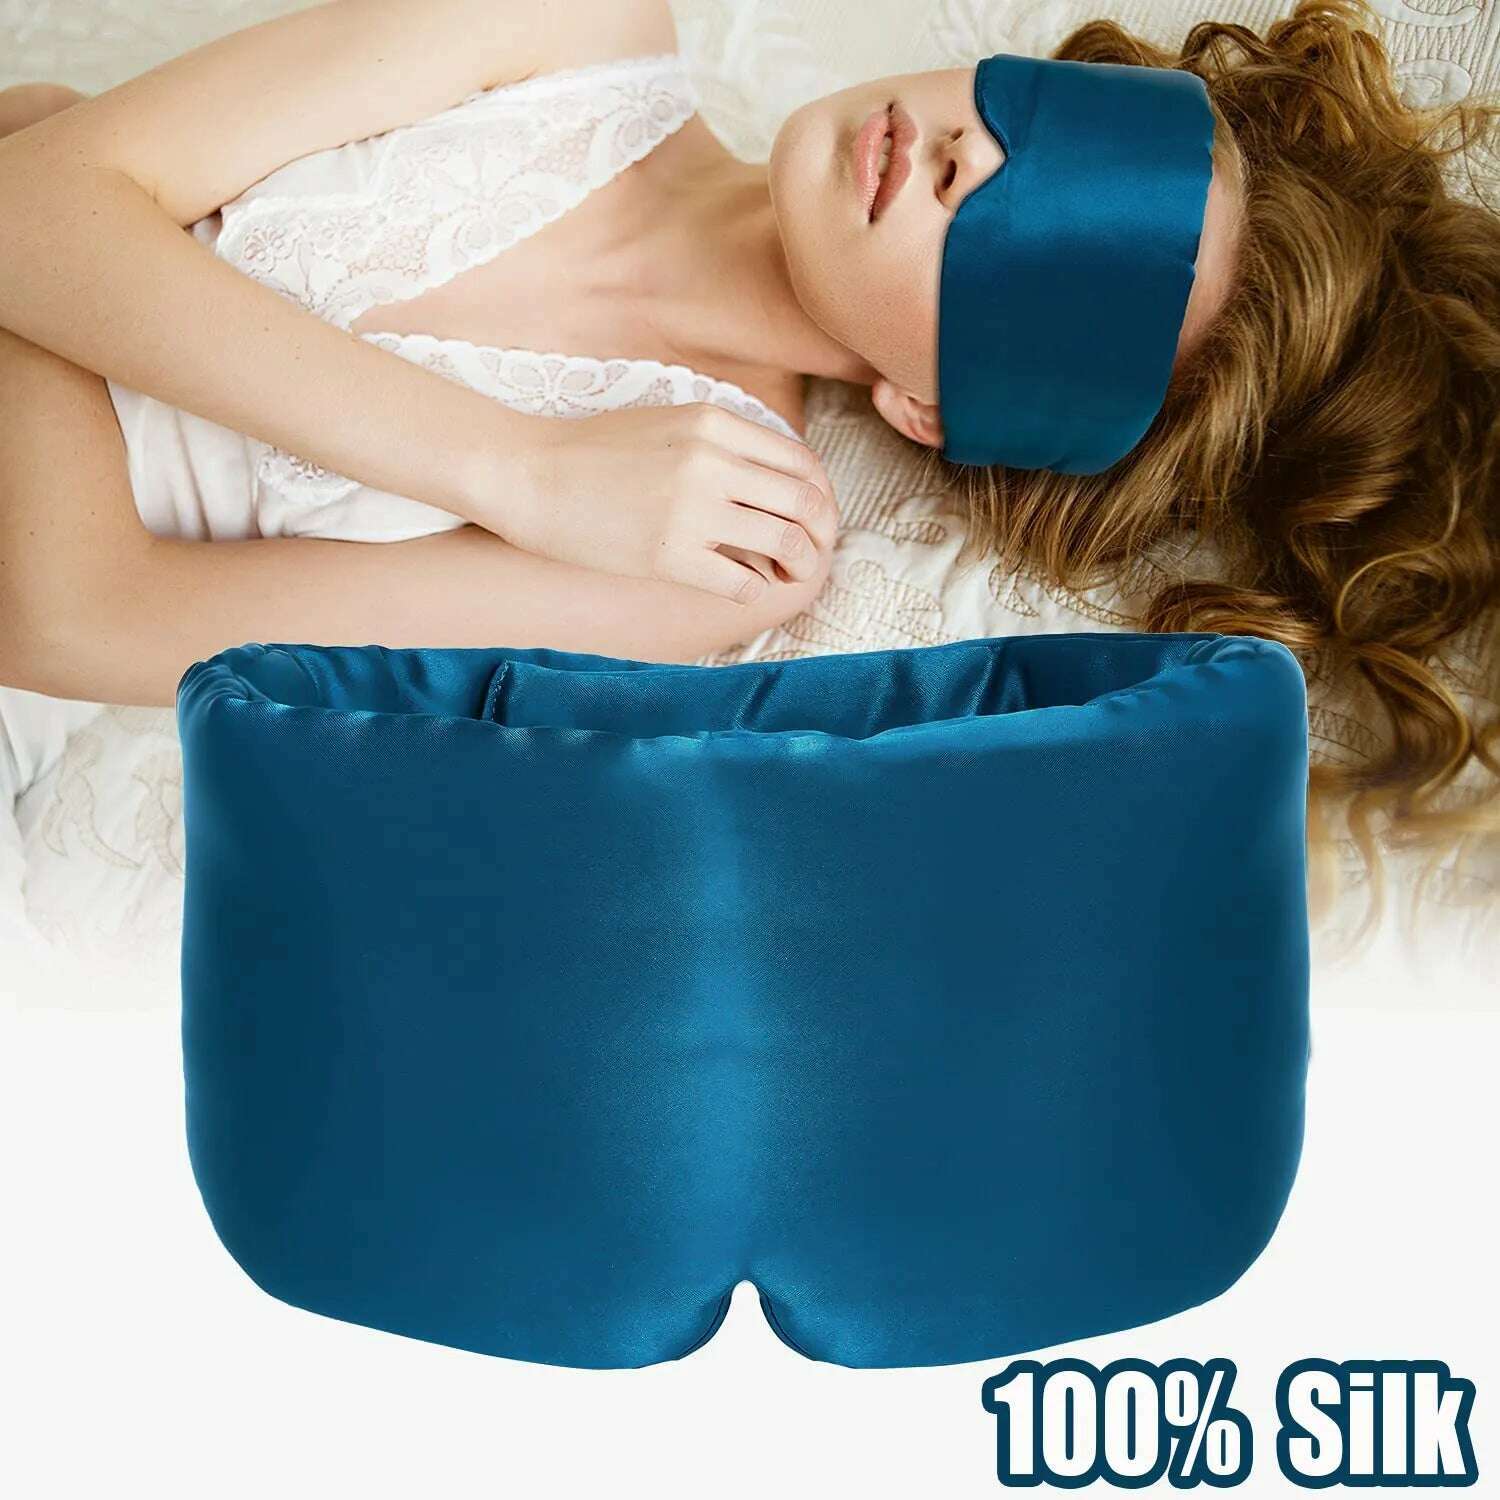 100% Natural Mulberry Silk Sleeping Mask Silk Eye Patch Eyeshade Portable Travel Eyepatch Nap Eye Cover Soft Blindfold Smooth, KIMLUD Women's Clothes